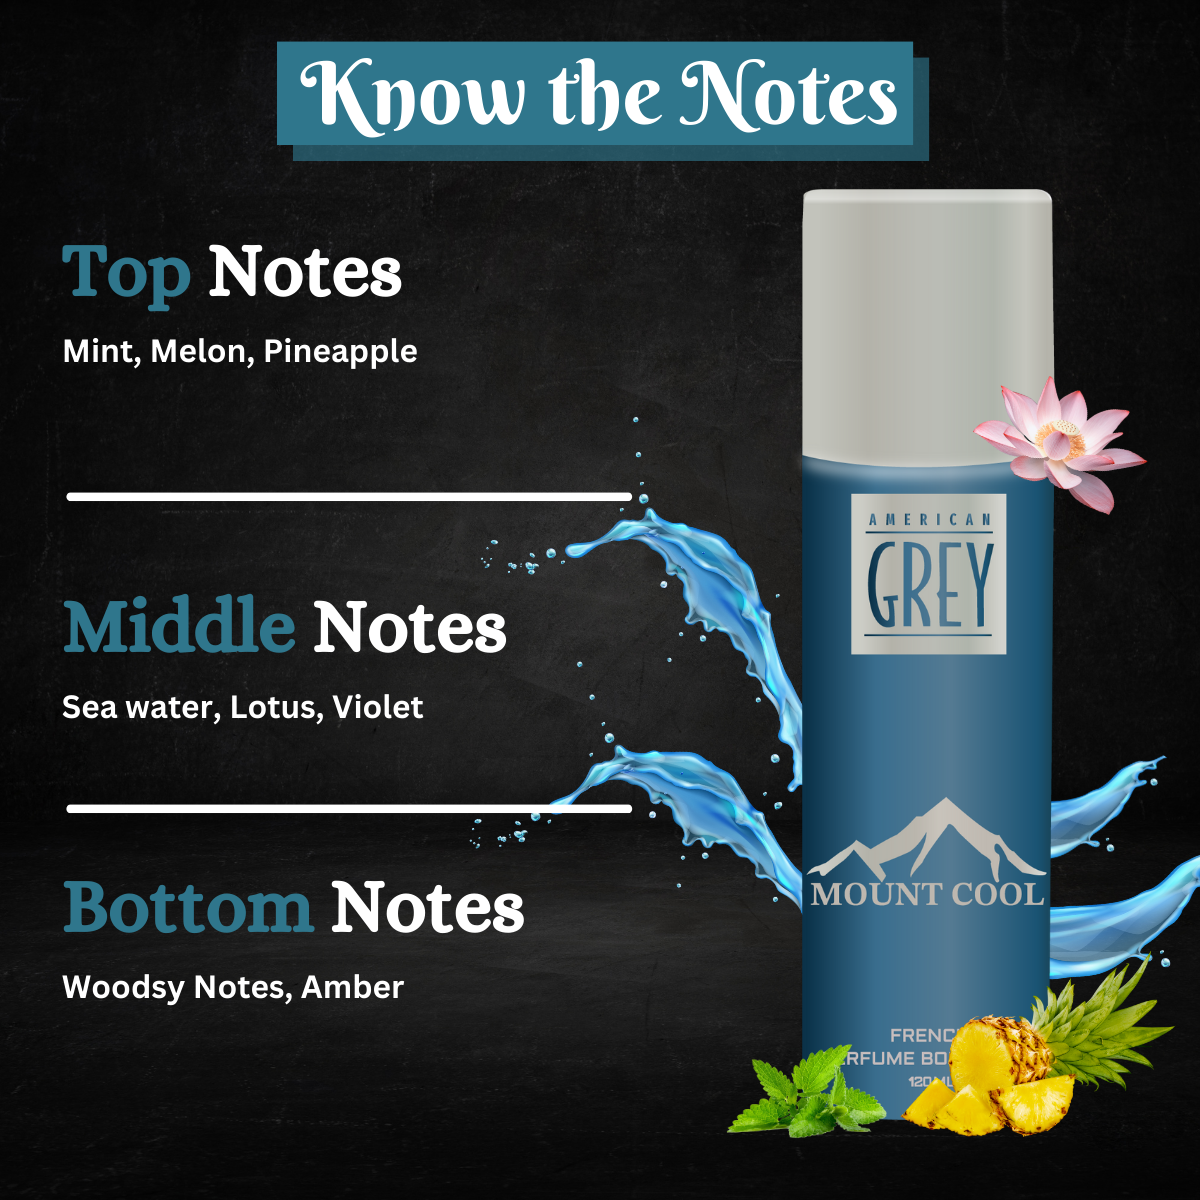 american grey mount cool notes, know the notes mount cool, notes of mount cool, notes of aquatic fragrance, base note of davidoff cool water